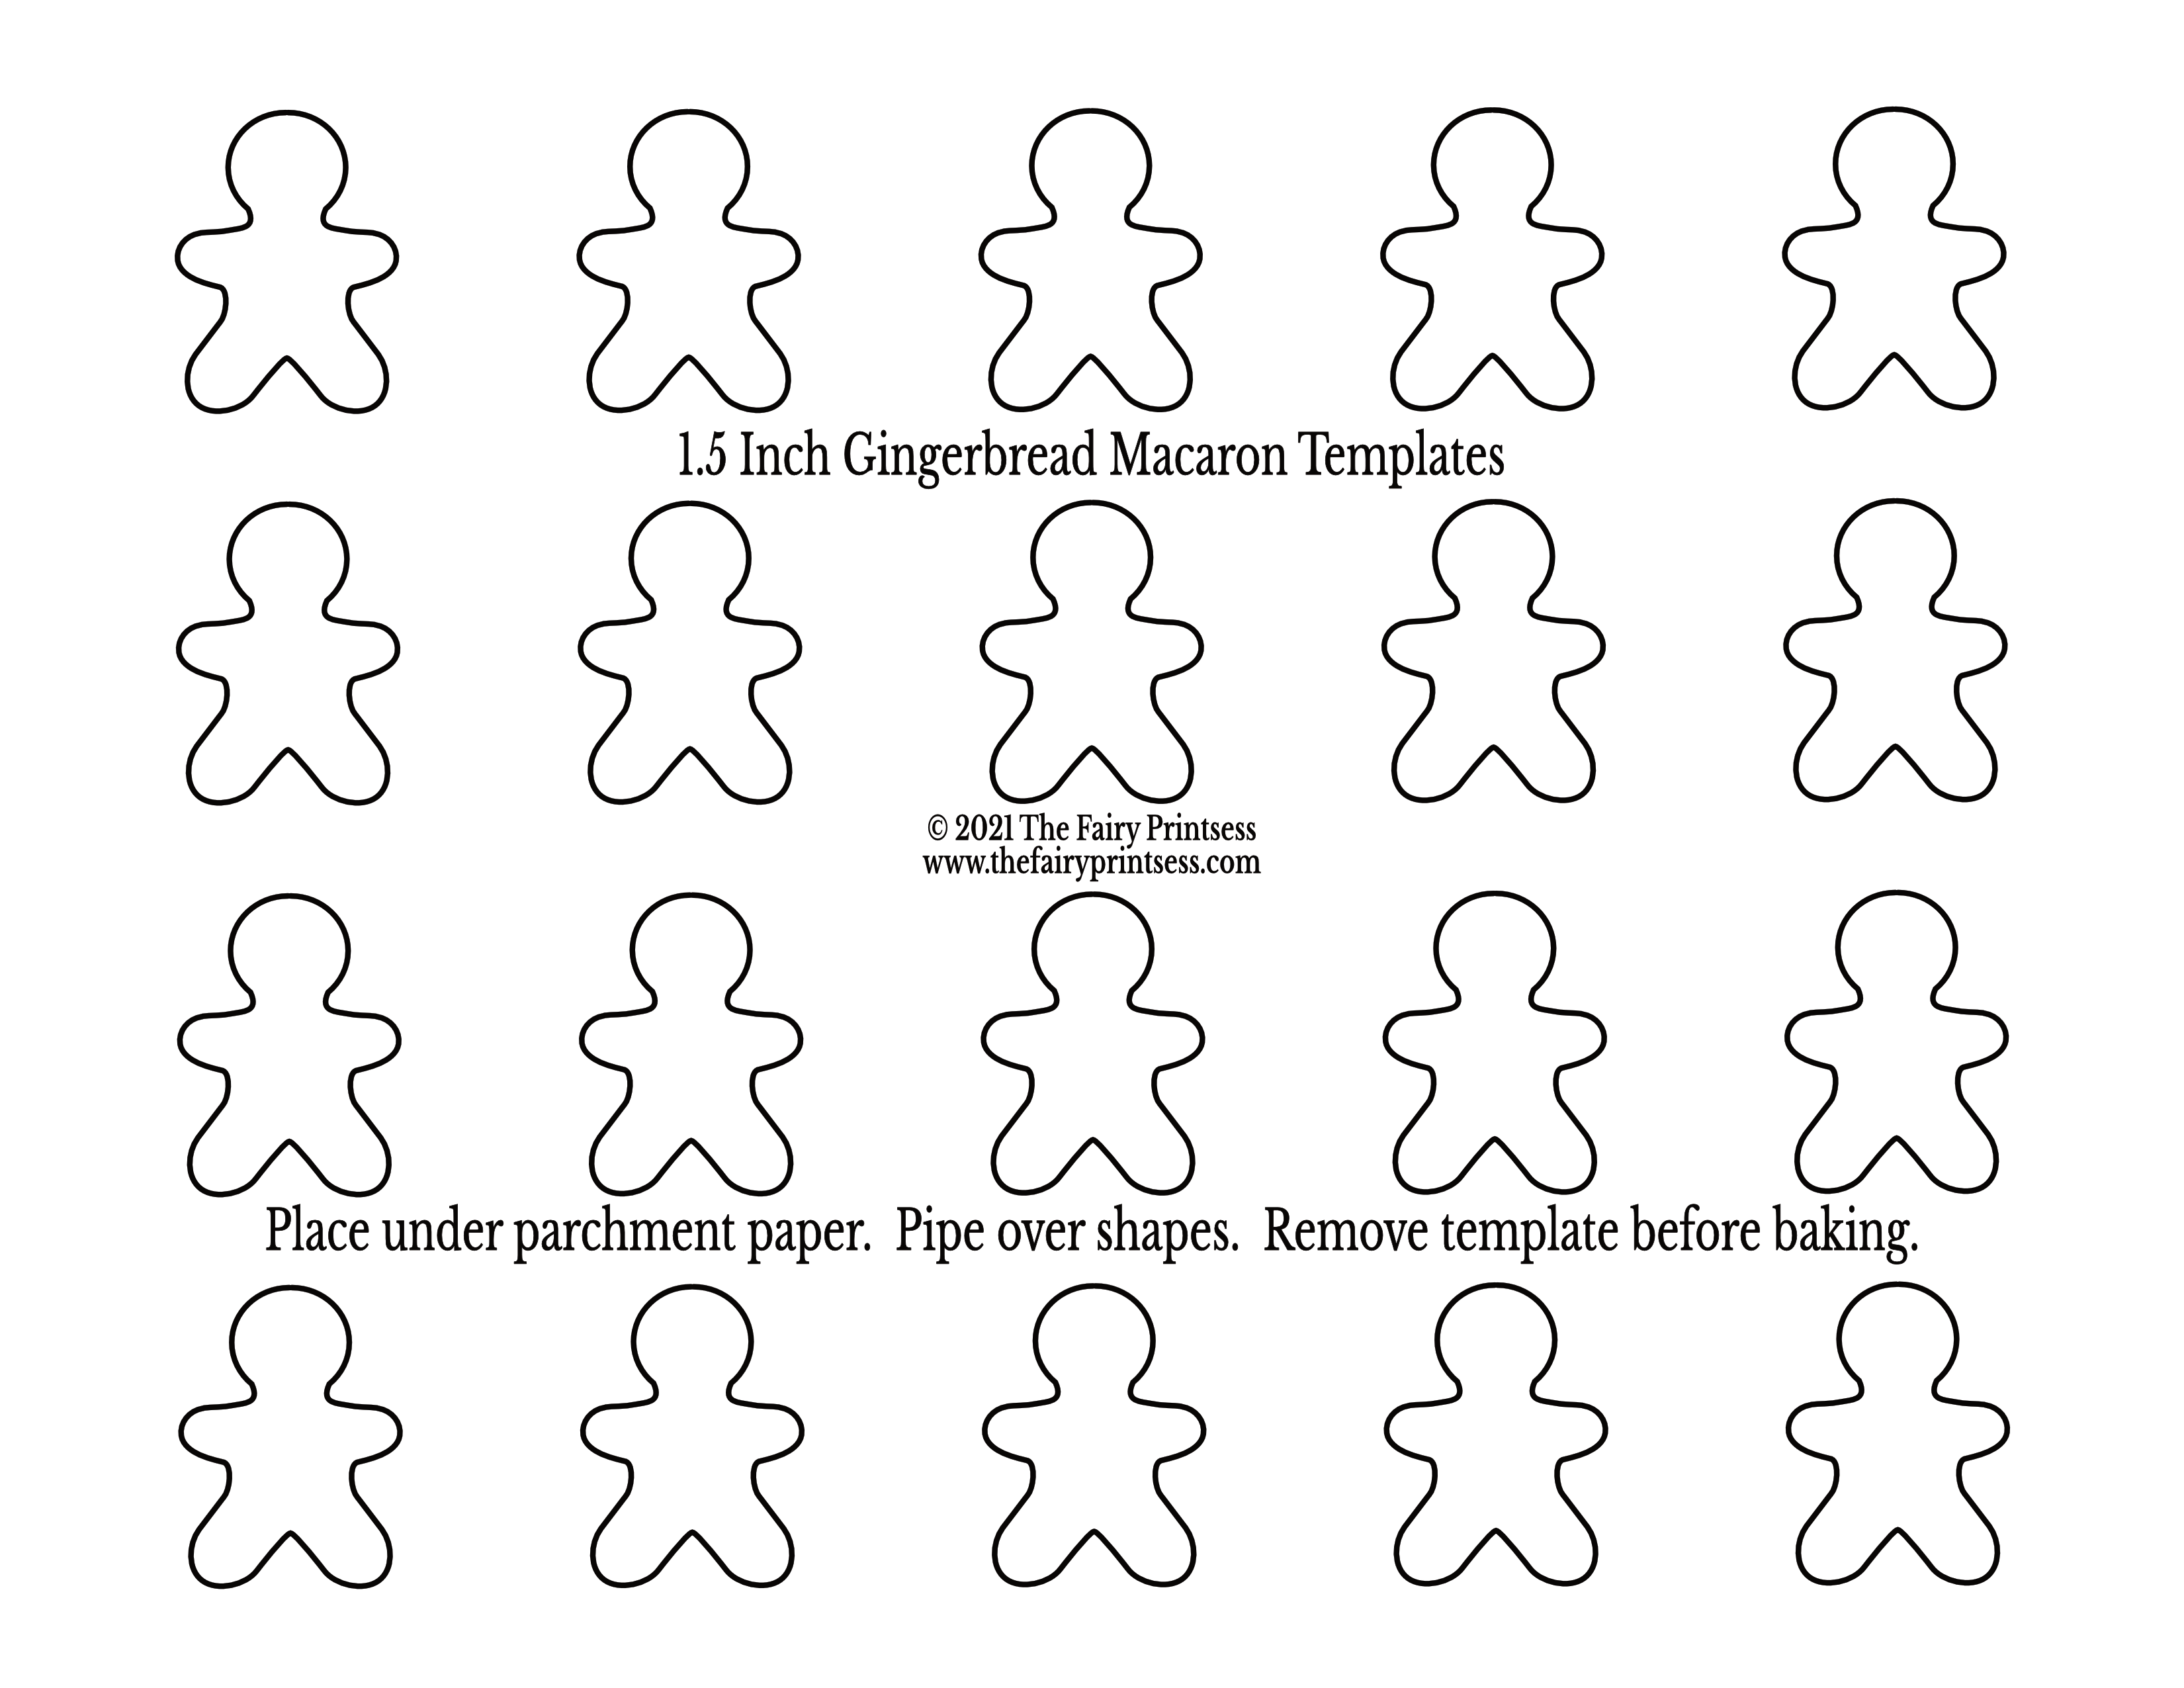 1.5 inch gingerbread man person macaron template free printable